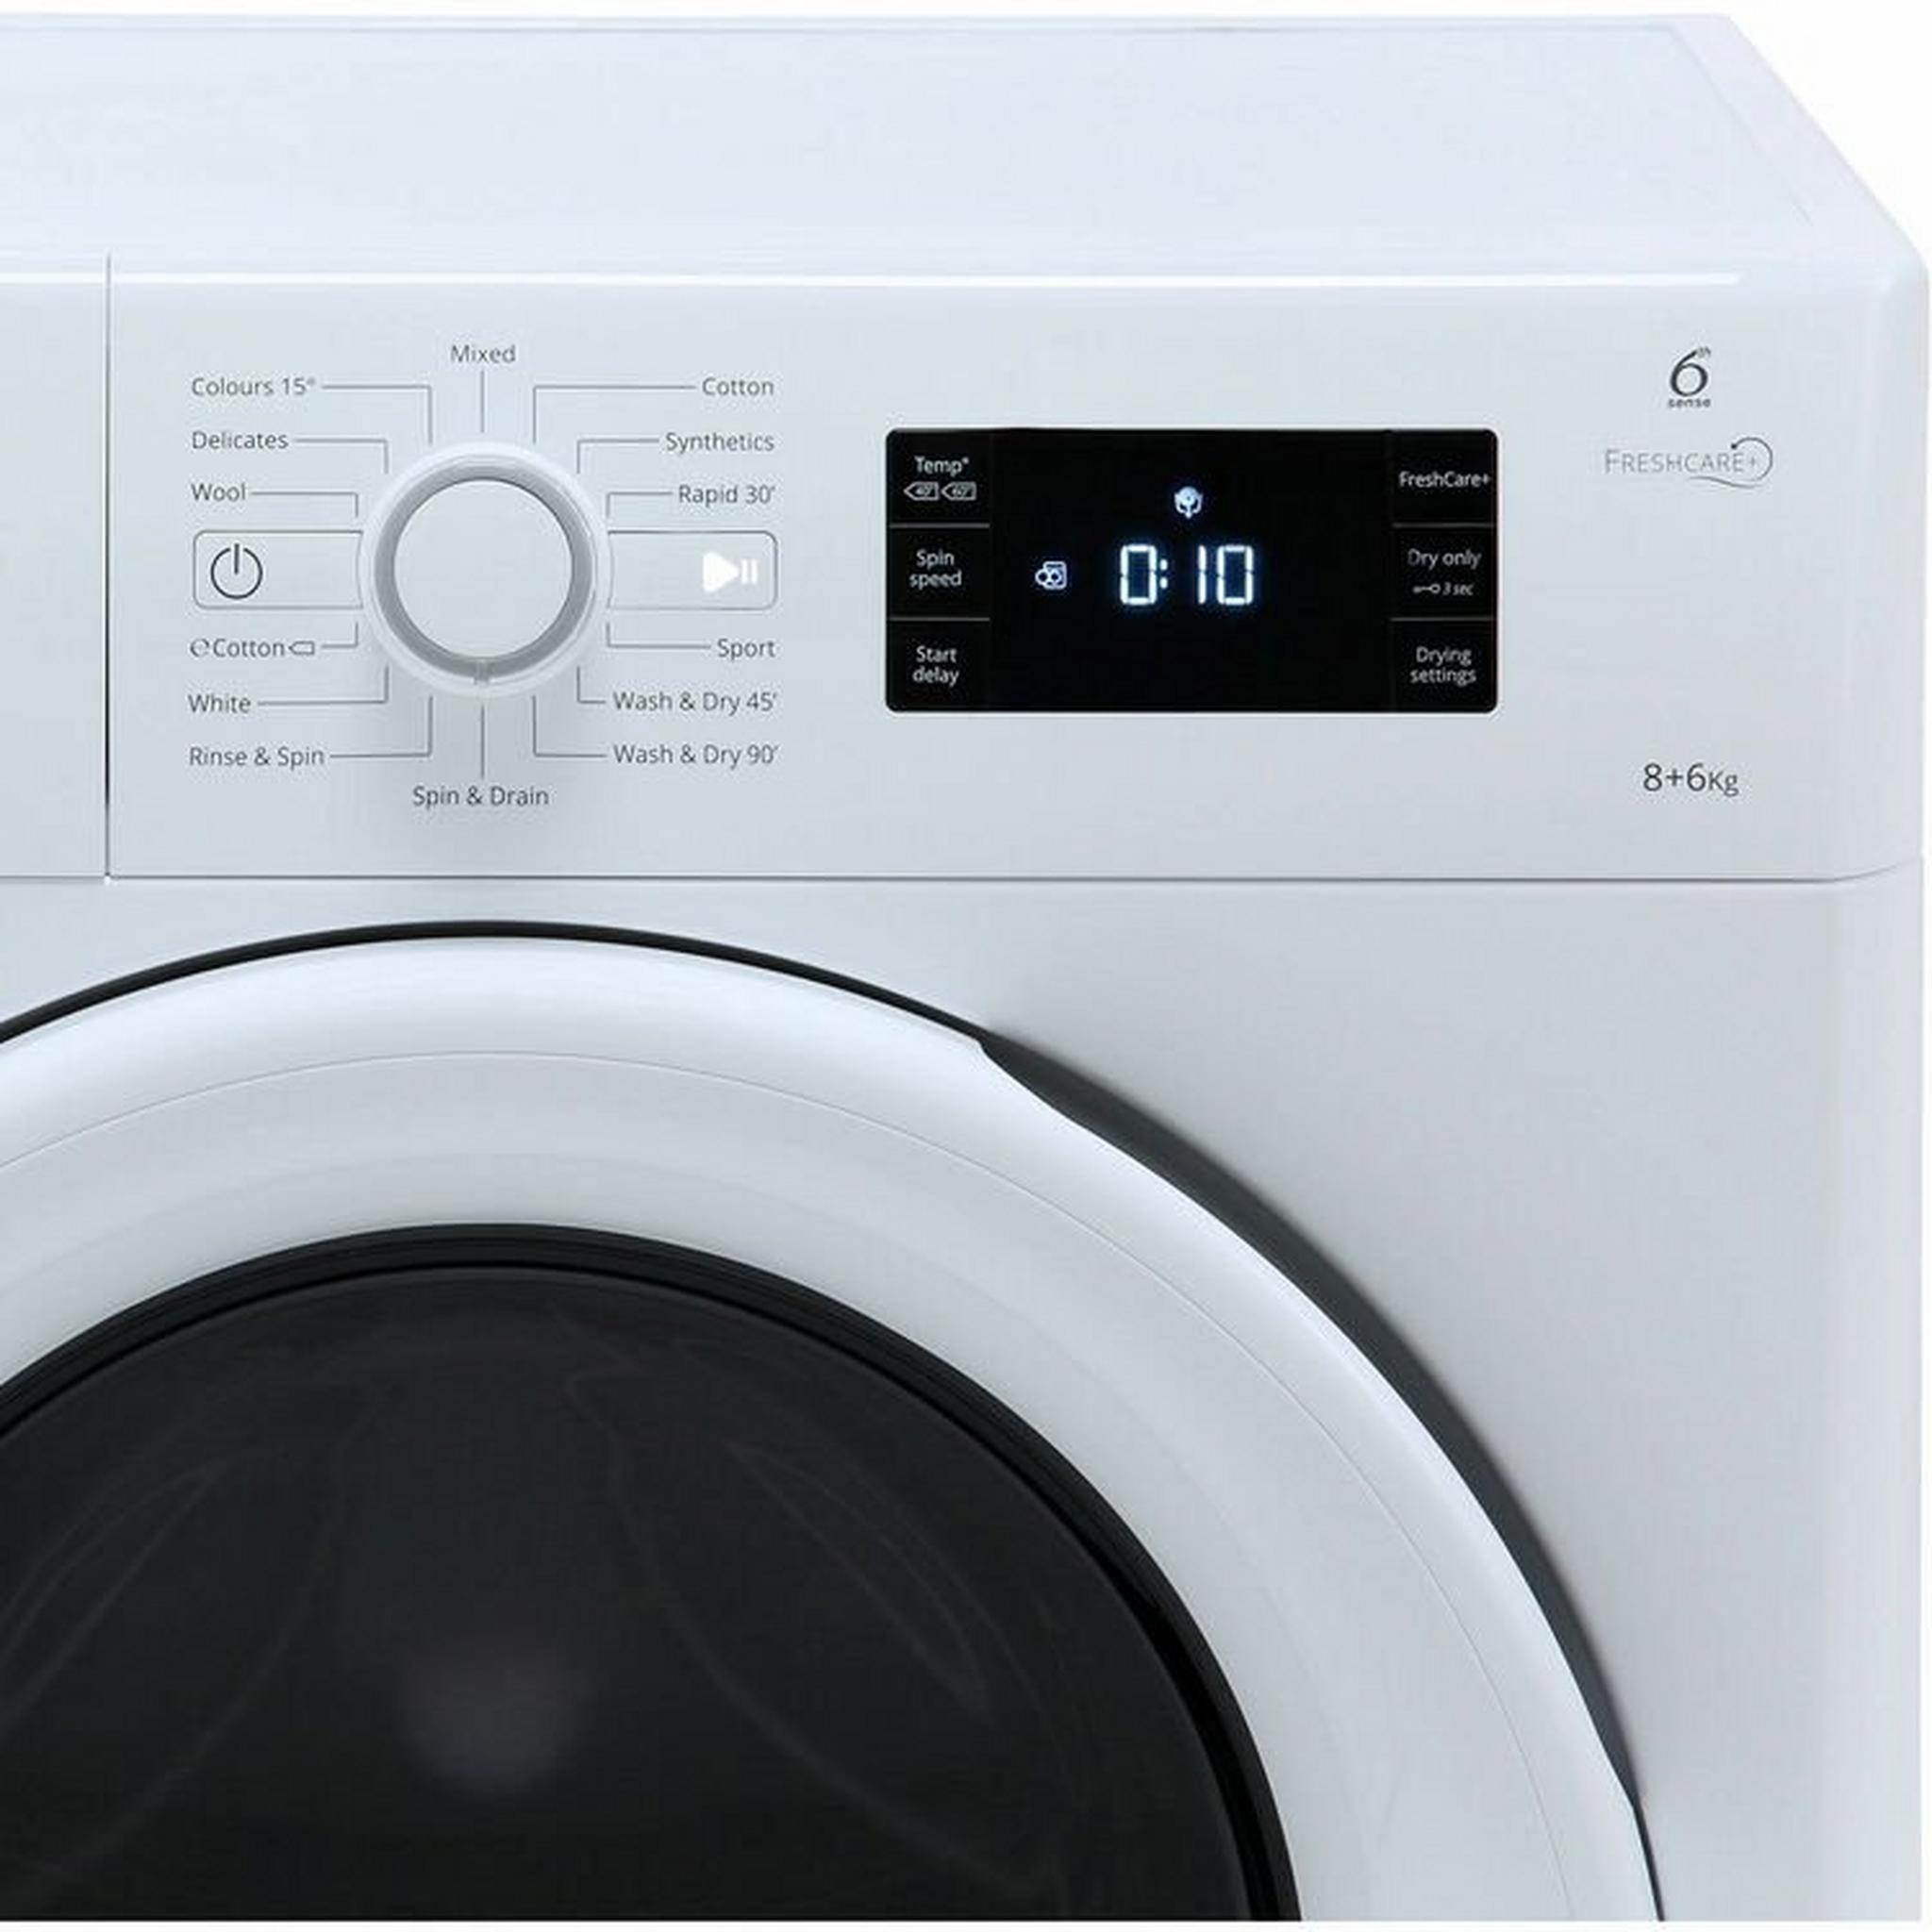 Whirlpool 8/6KG 1400RPM Front Load Washer/Dryer - (FWDG86148W)